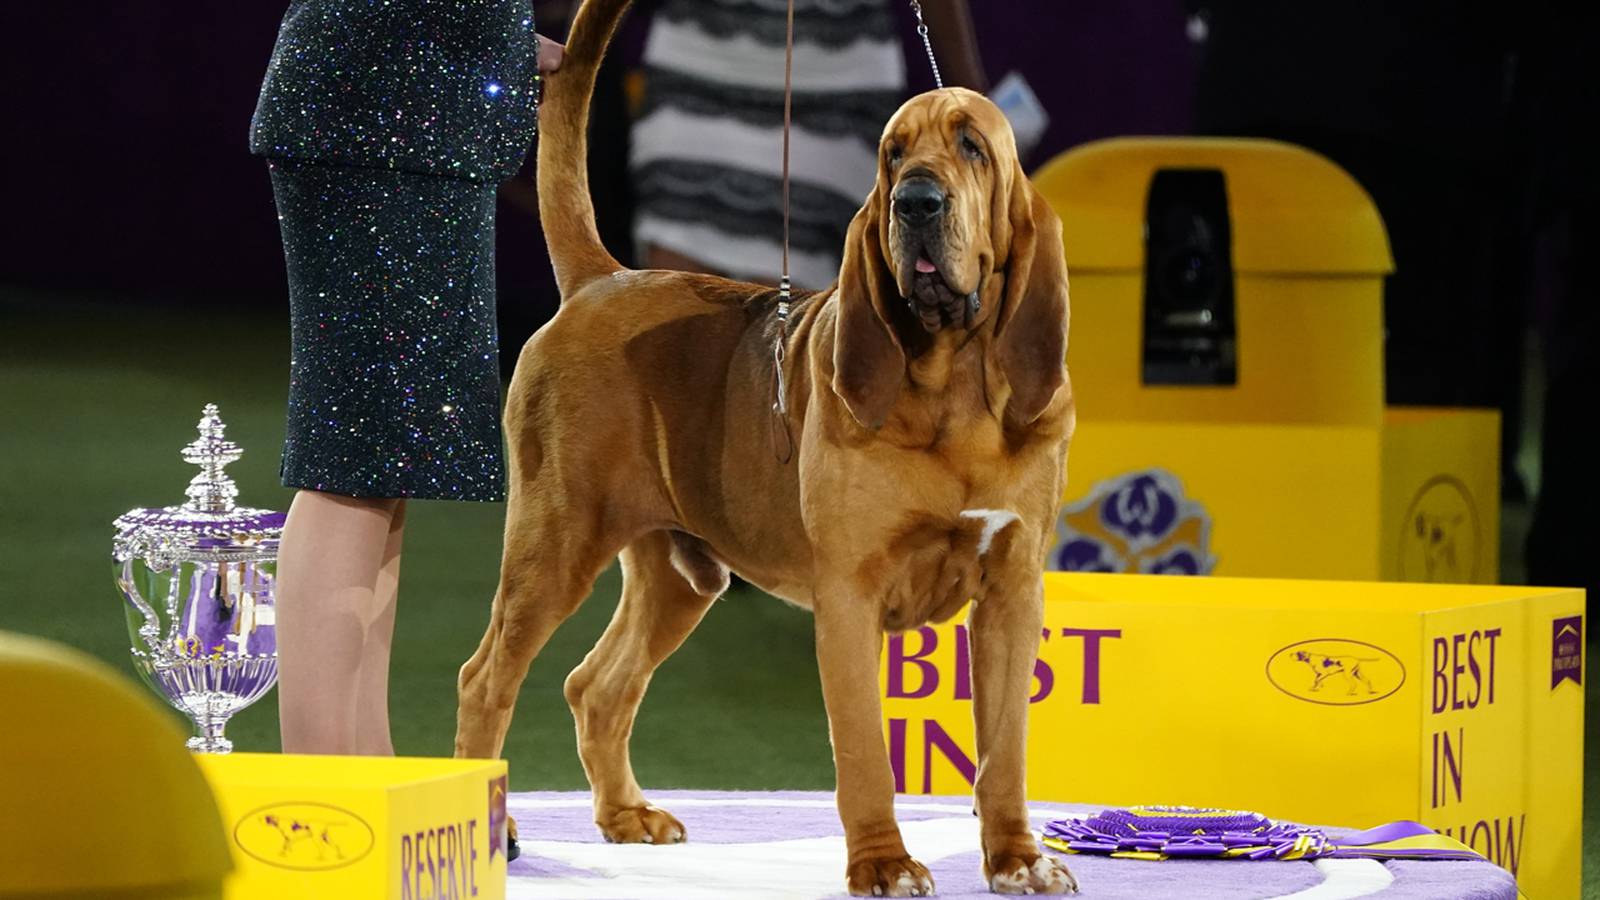 Westminster Dog Show 2022 See the best in show, group winners 106.1 BLI